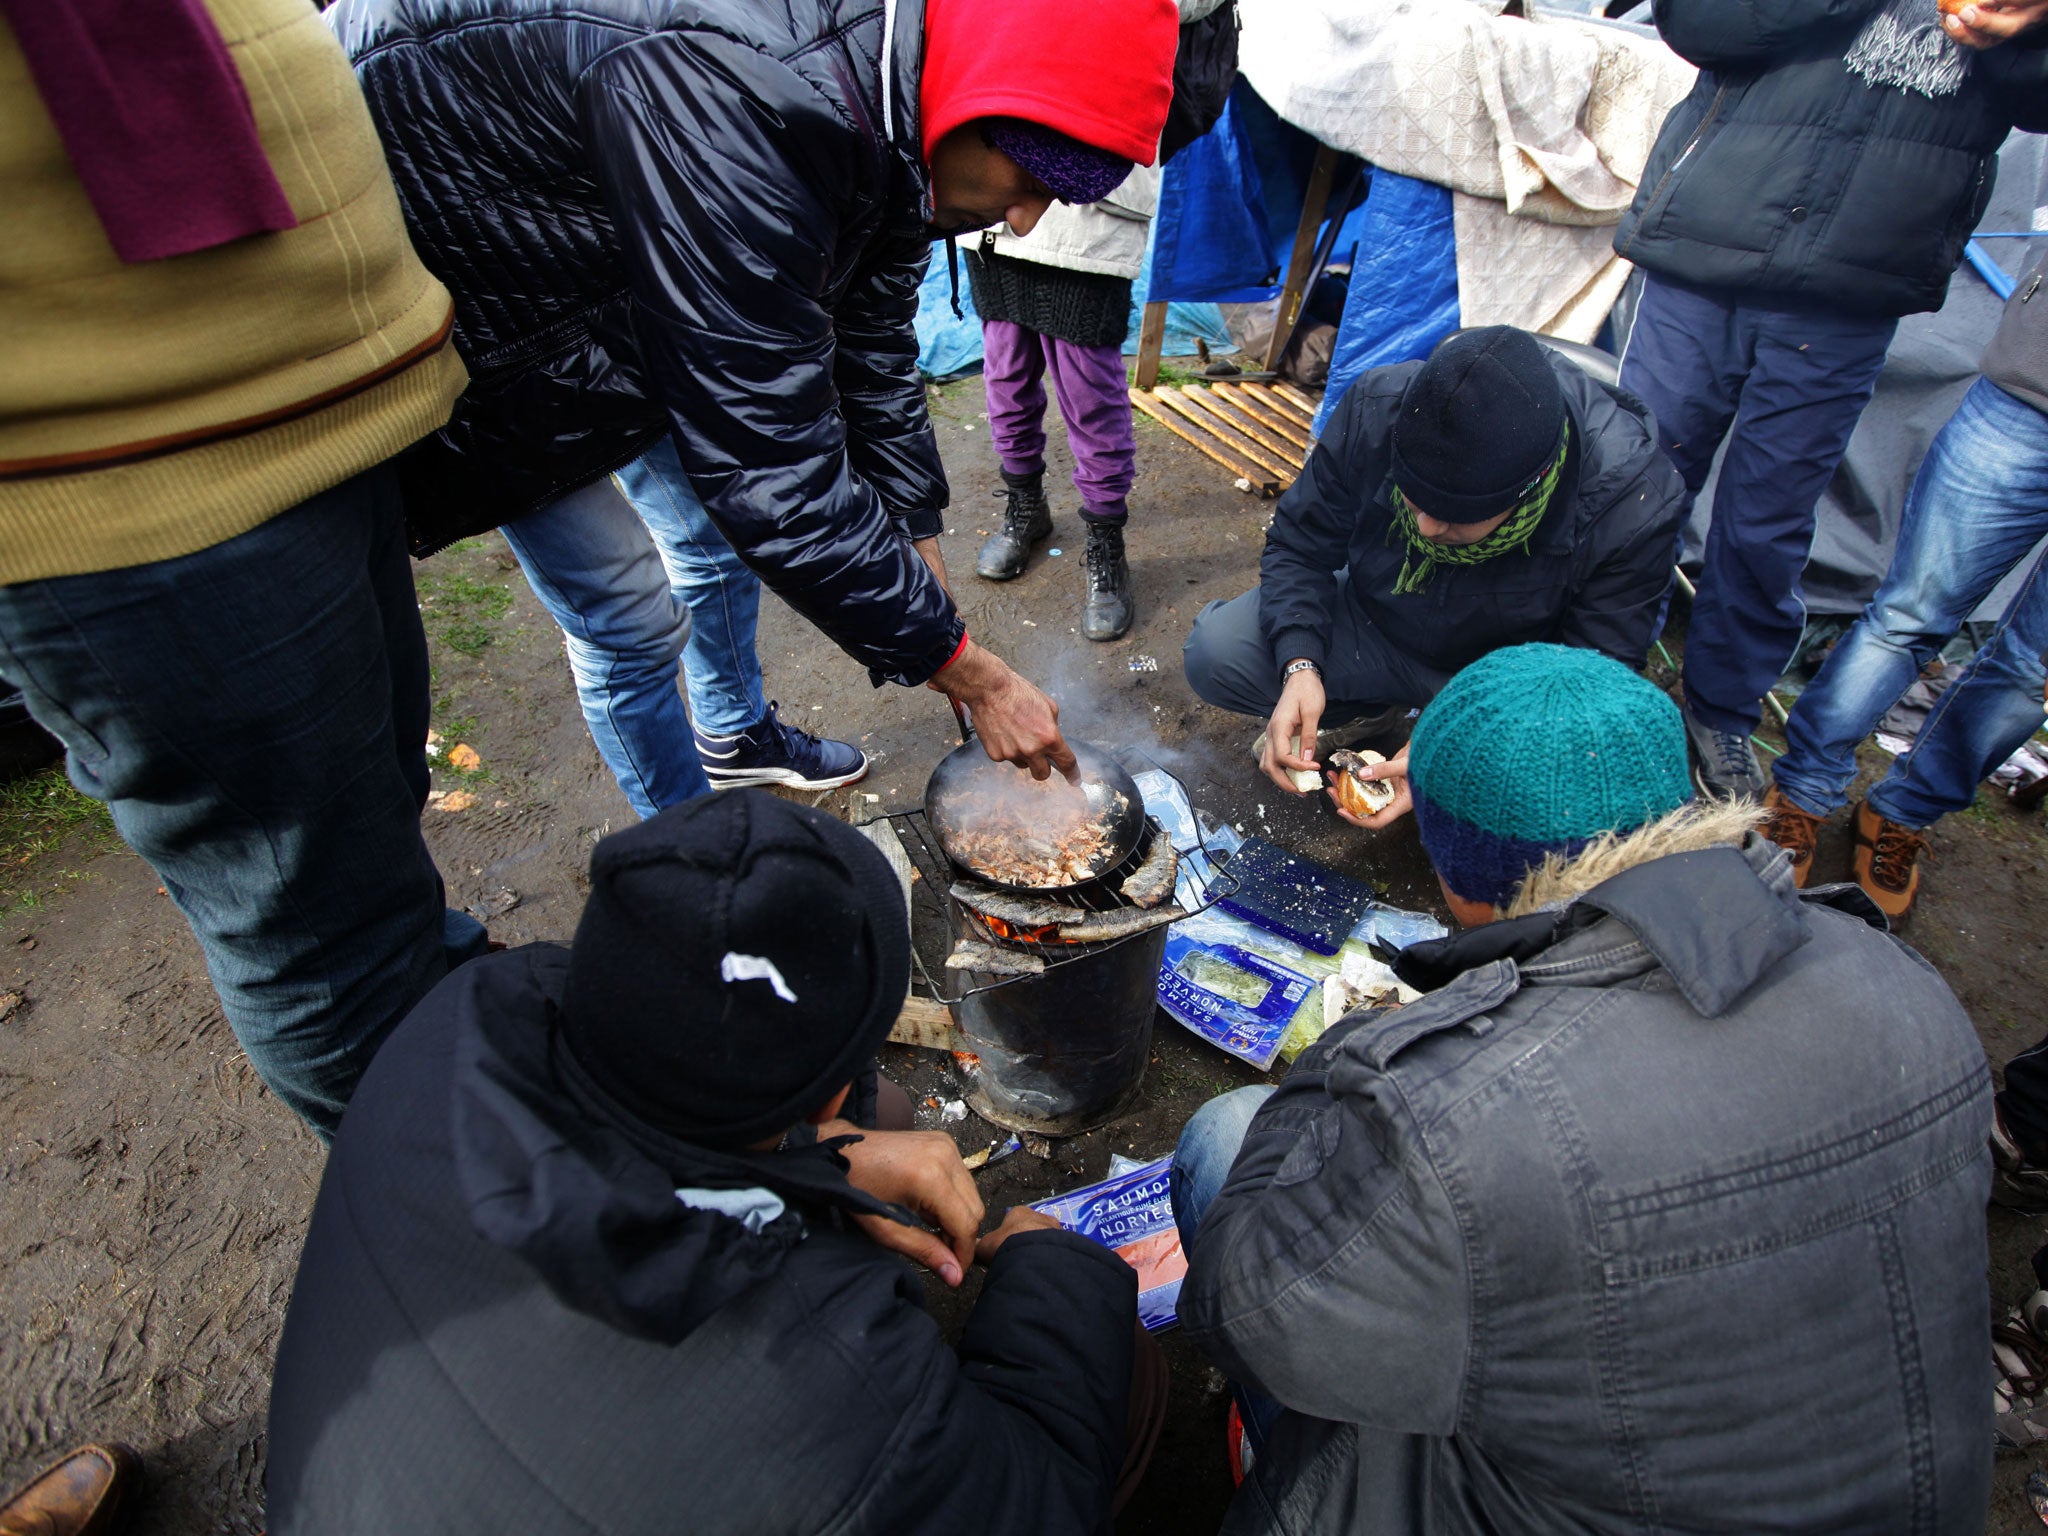 Camp residents cook and share food at their site just outside Calais